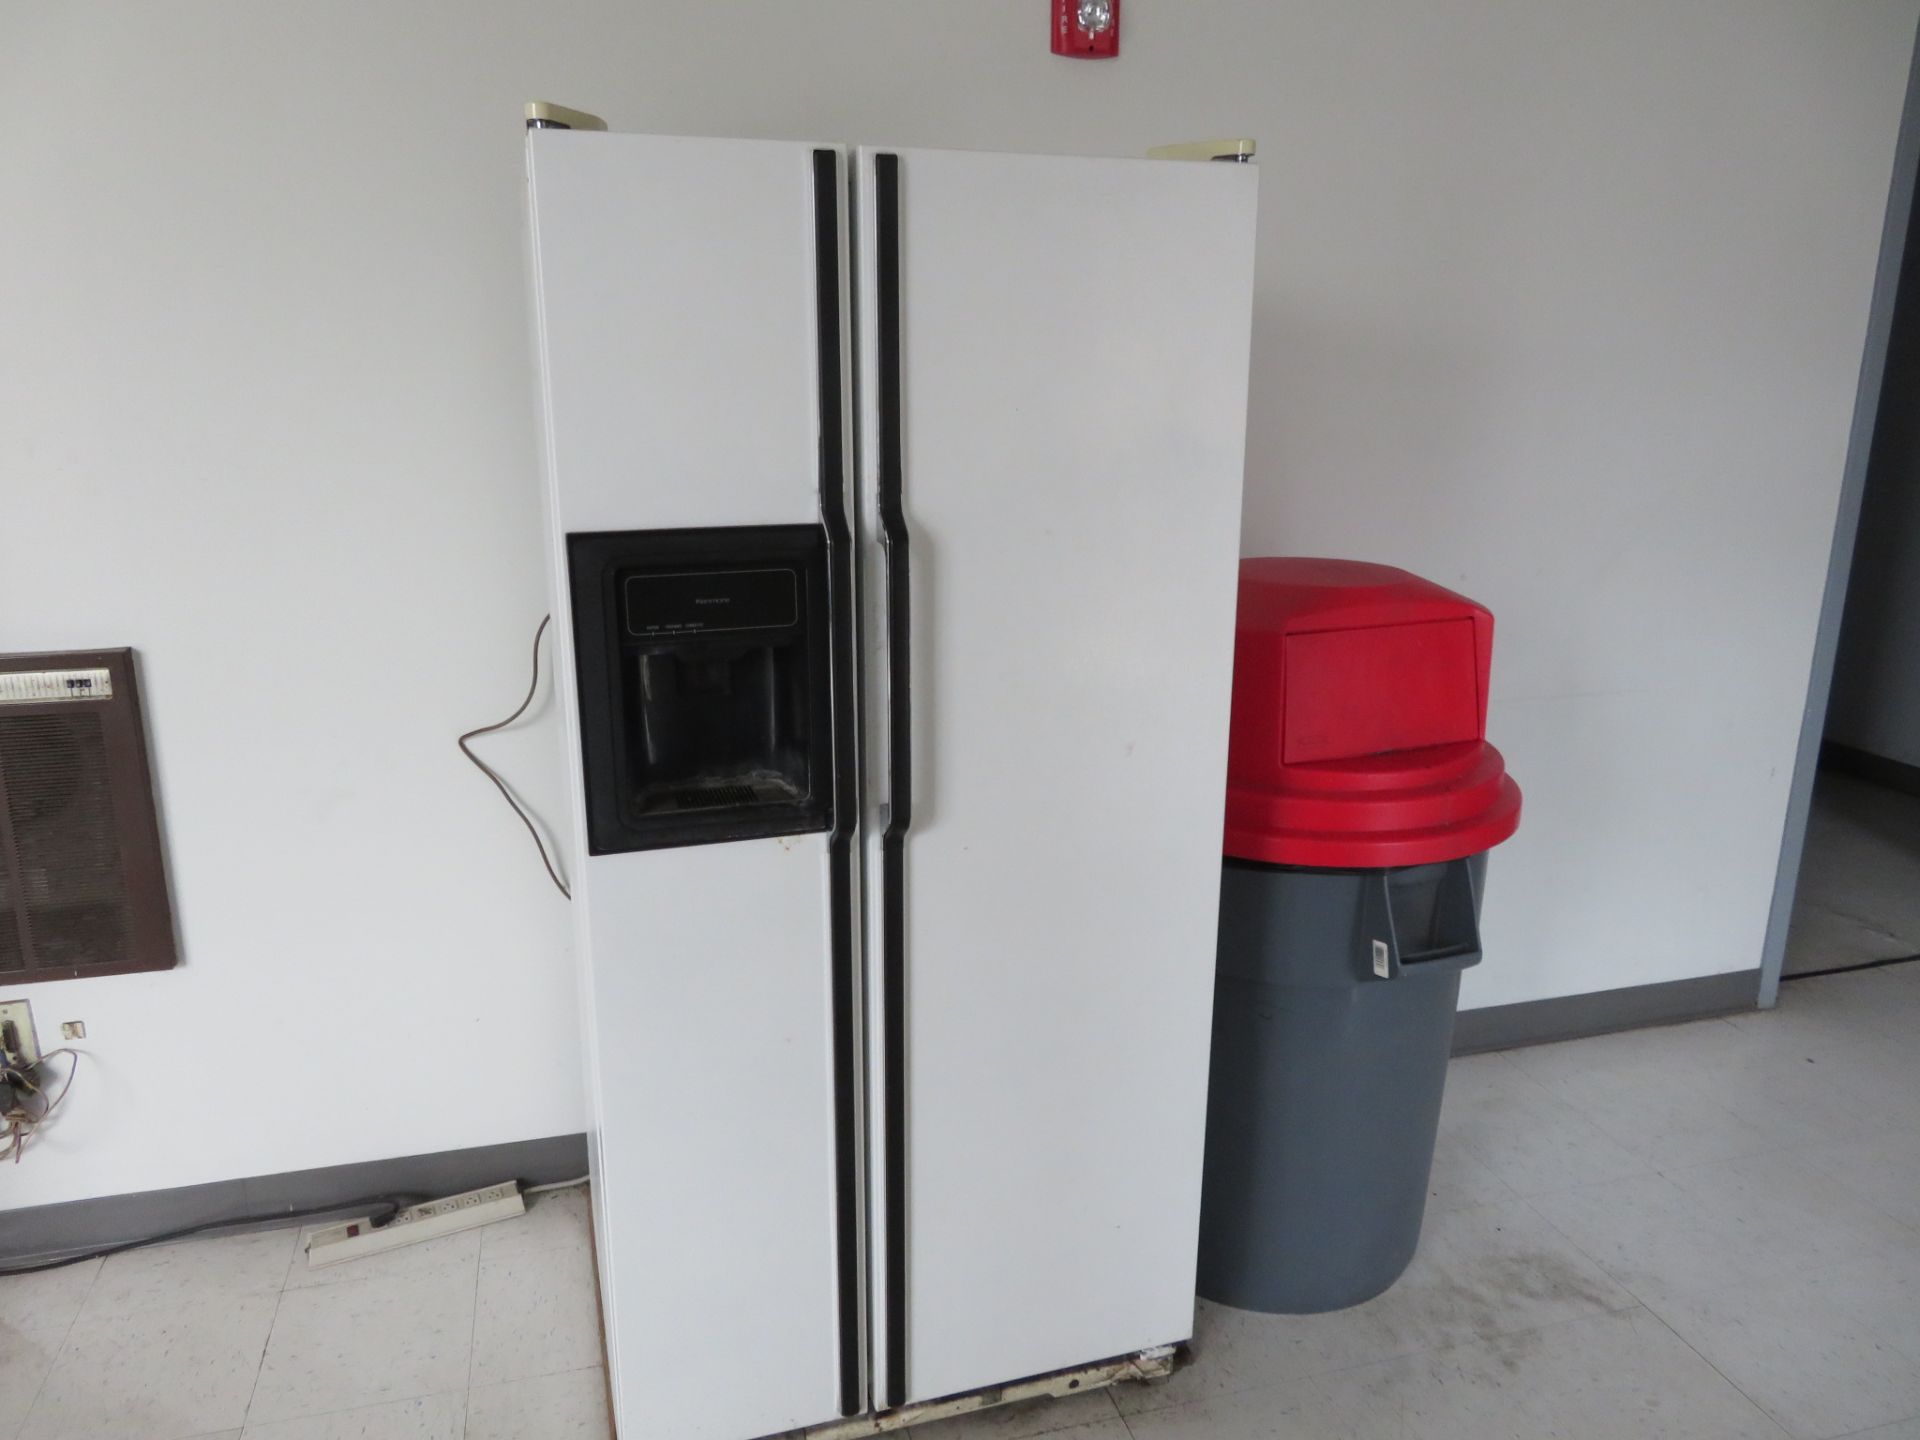 [LOT] (3) Microwaves, (2) Refrigerators, Rectangular Table (12) Chairs, Water Cooler, Hand Soap - Image 3 of 4